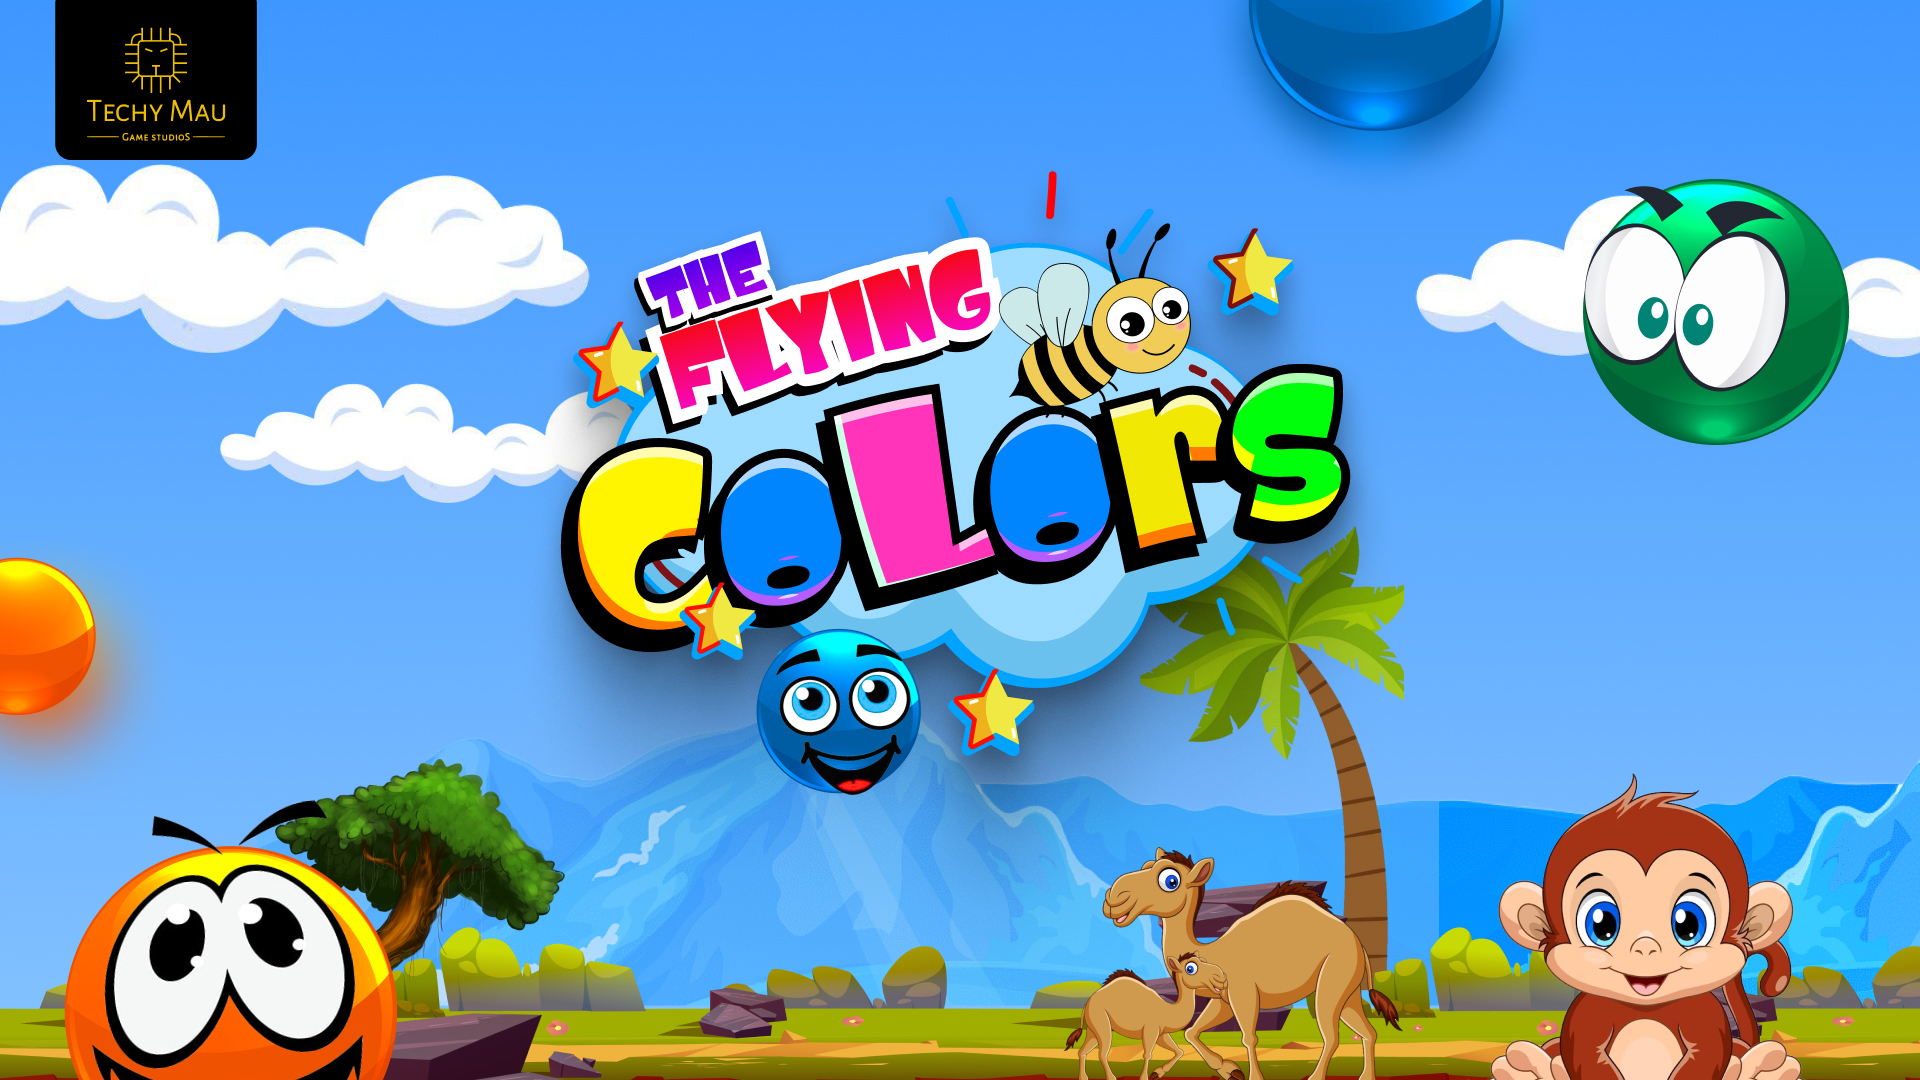 The Flying Colors - Hyper Casual Mobile Game